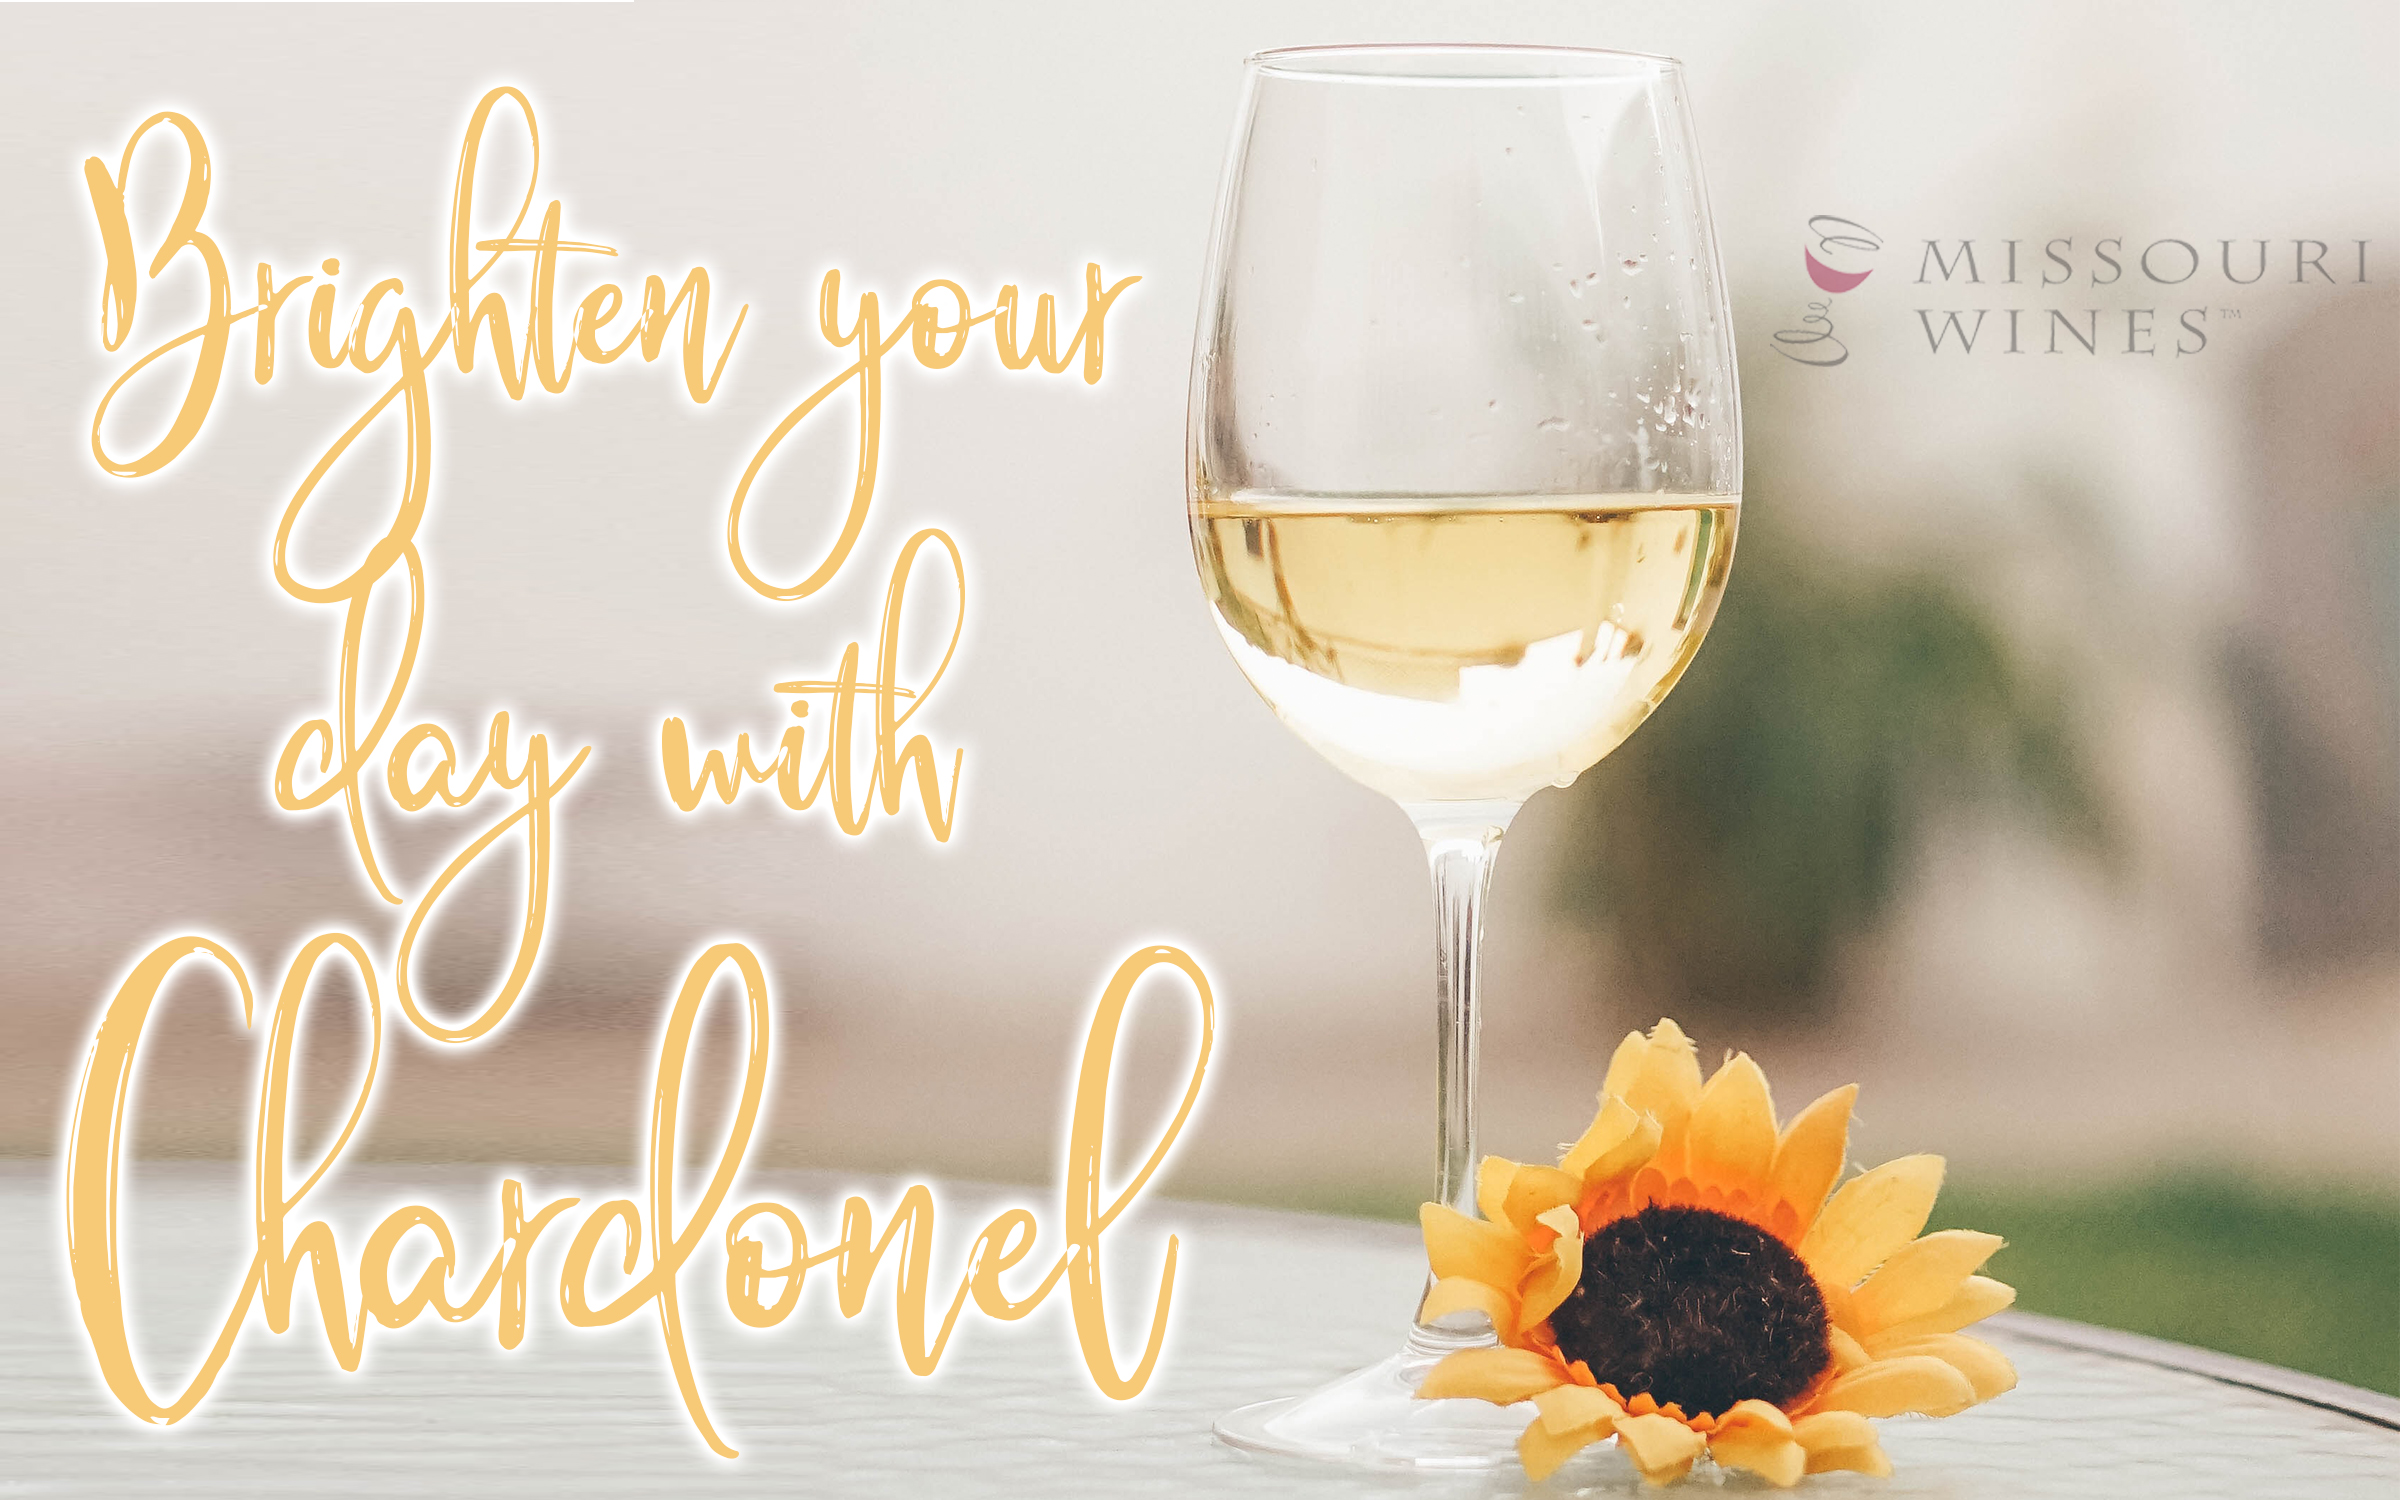 Brighten Your Day with Chardonel